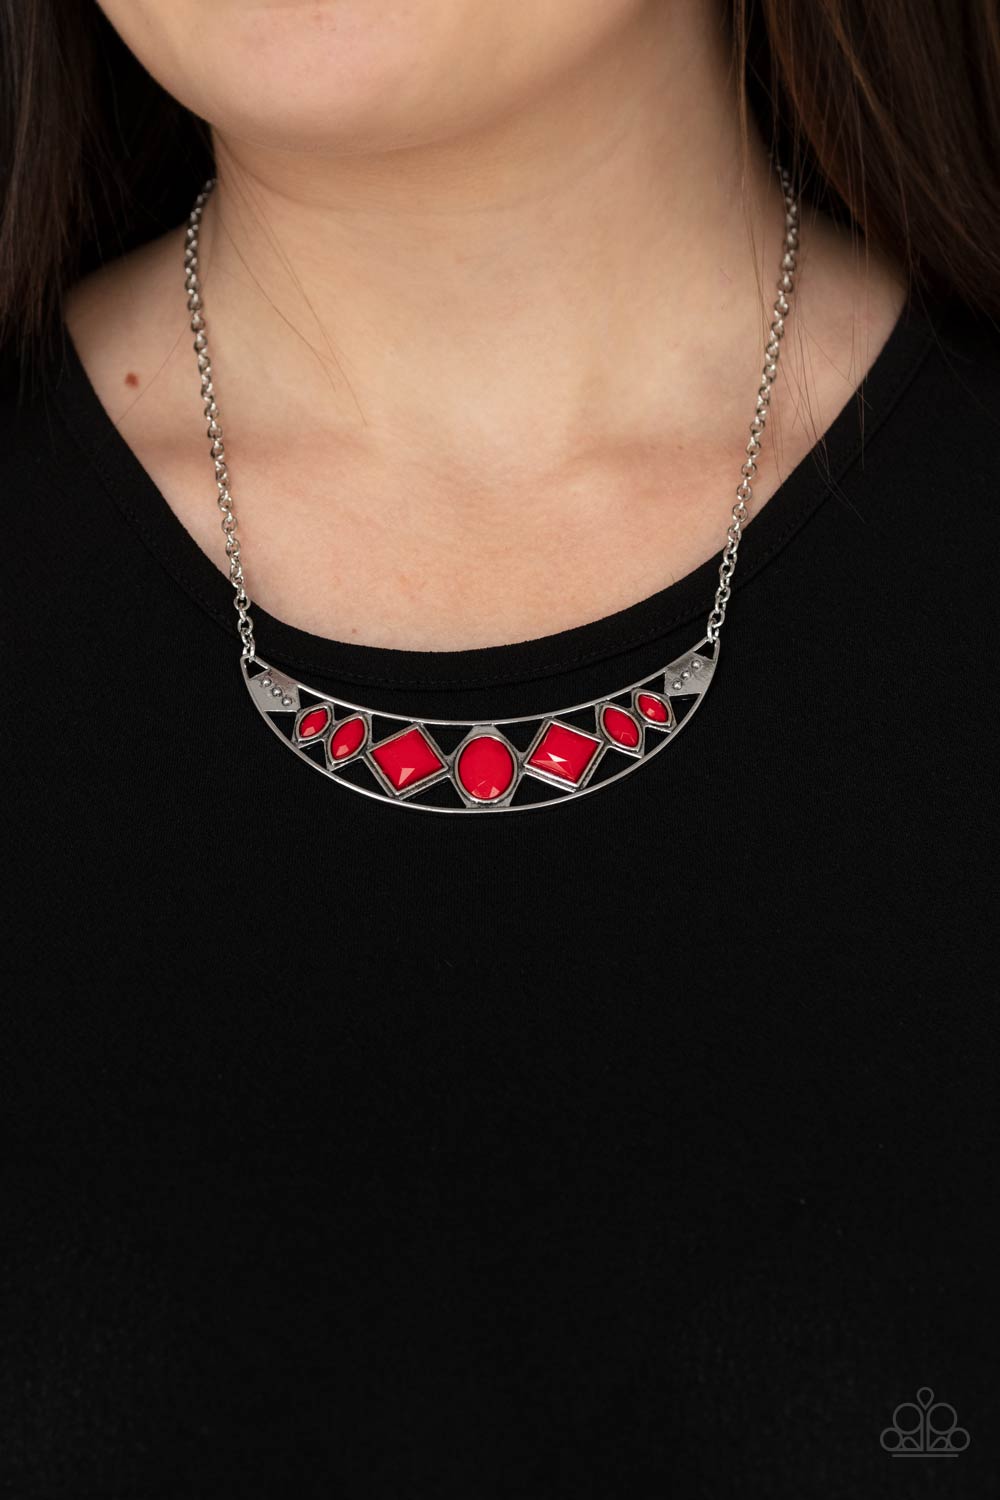 PRE-ORDER - Paparazzi Emblazoned Era - Red - Necklace & Earrings - $5 Jewelry with Ashley Swint